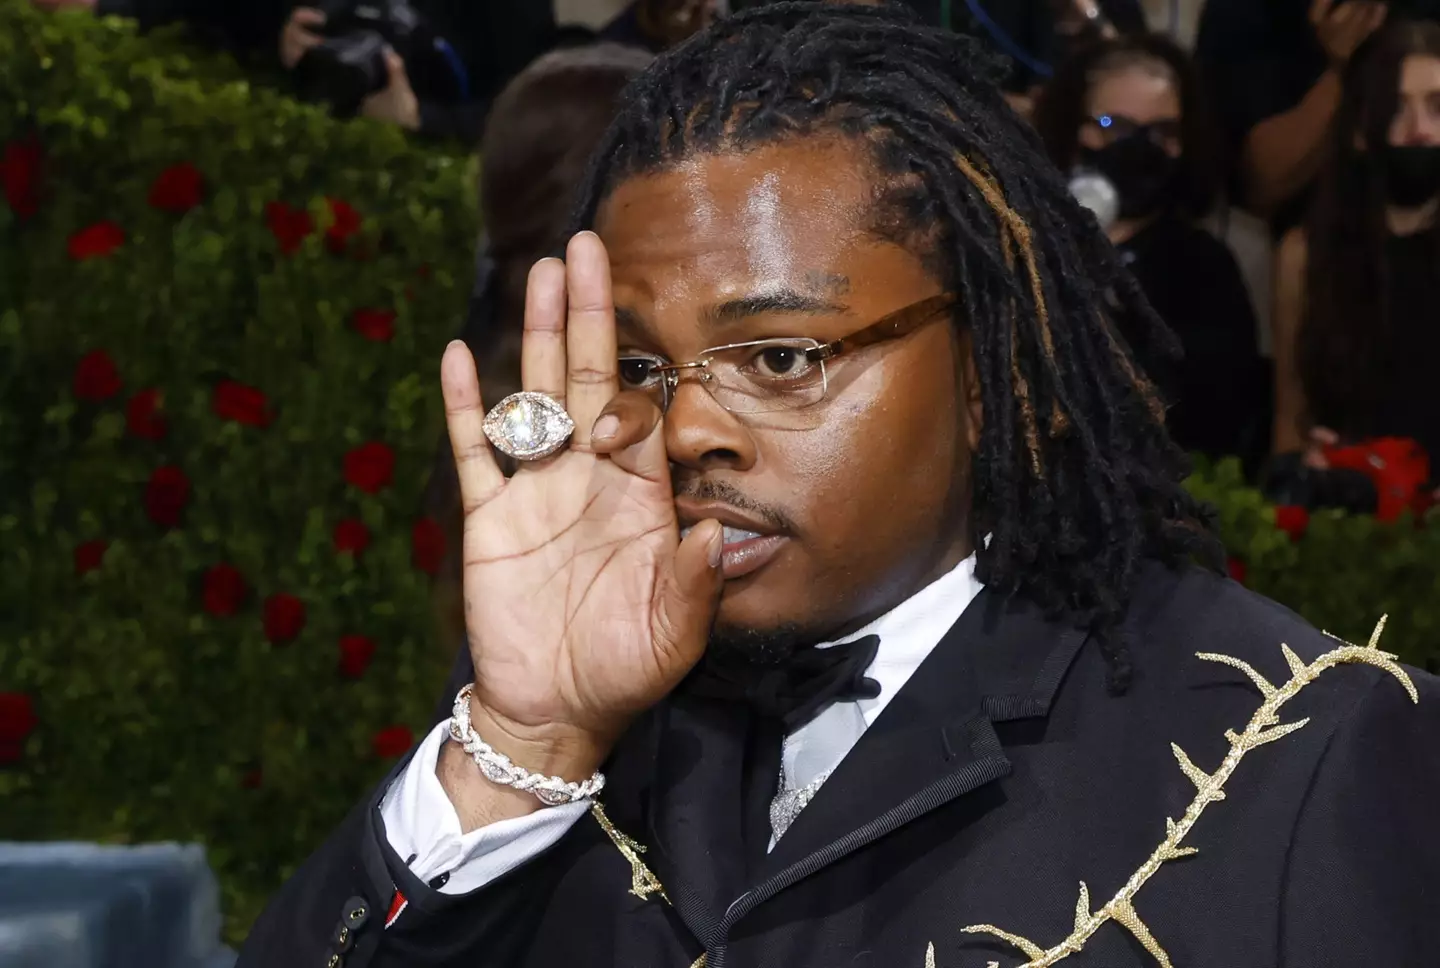 Fellow rapper Gunna was also indicted on Monday, 9 May.